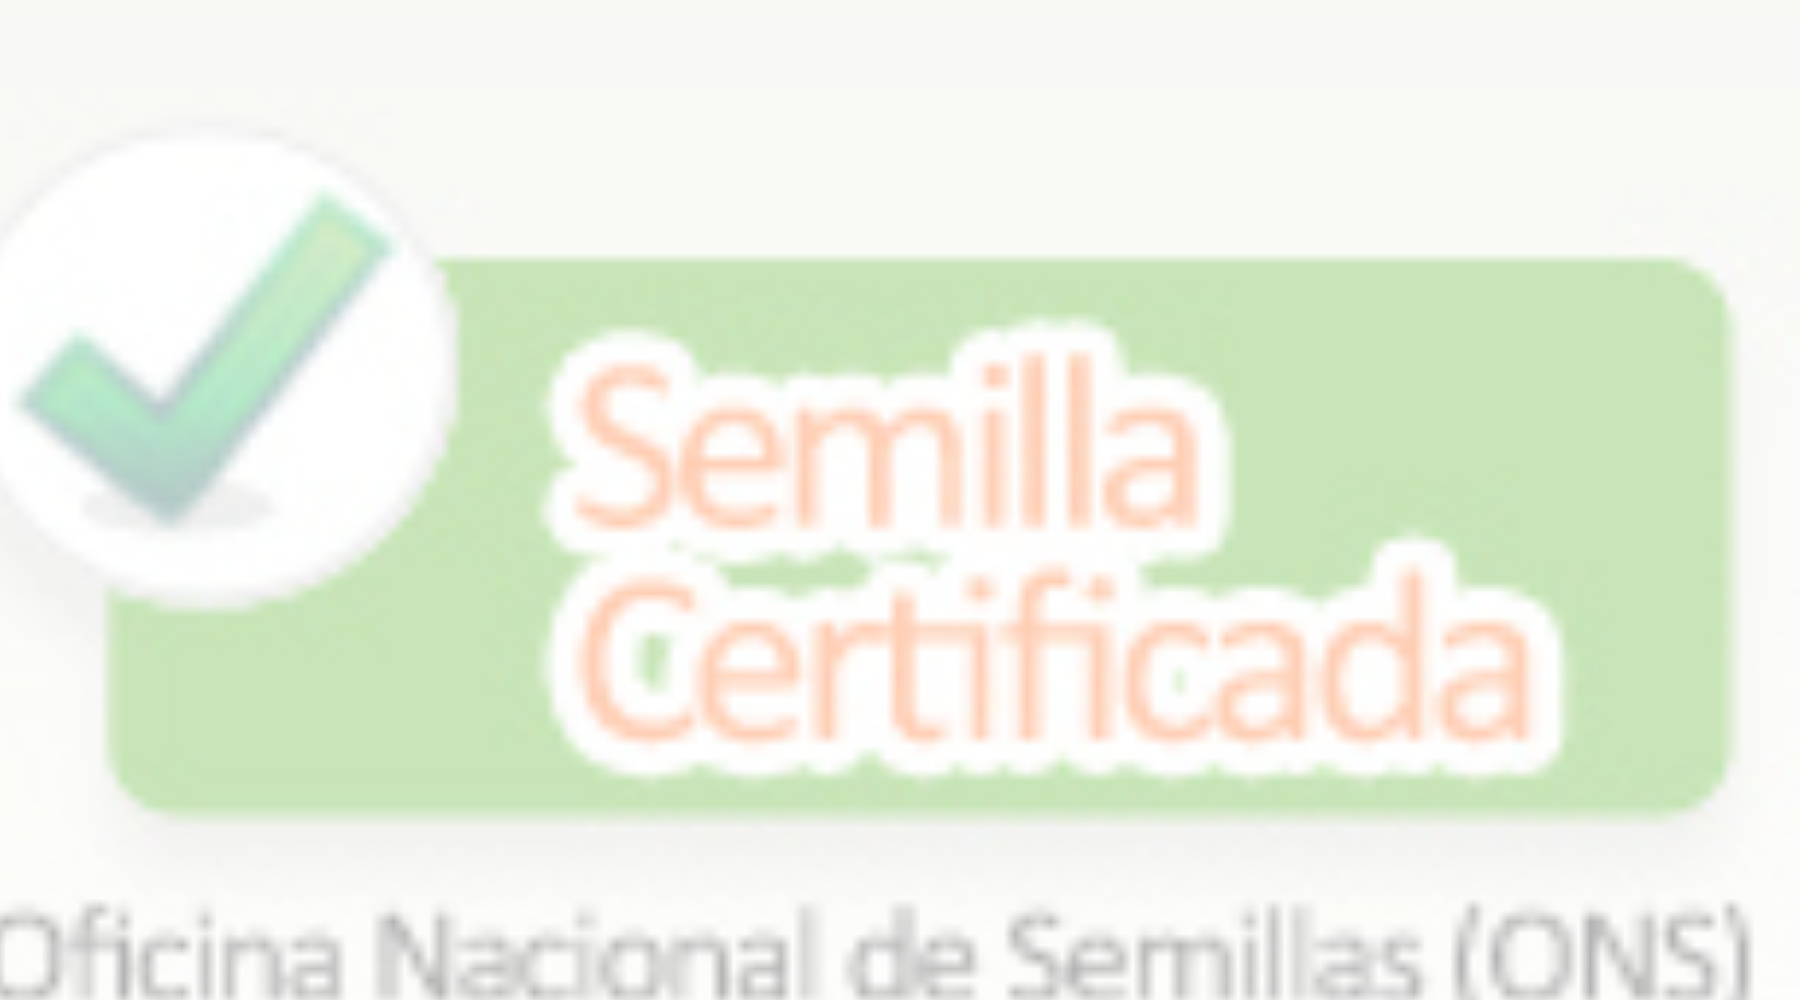 https://agroshow.info/wp-content/uploads/2023/03/SEMILLAS-Y-BOSQUES-LISTO_FONDO.png